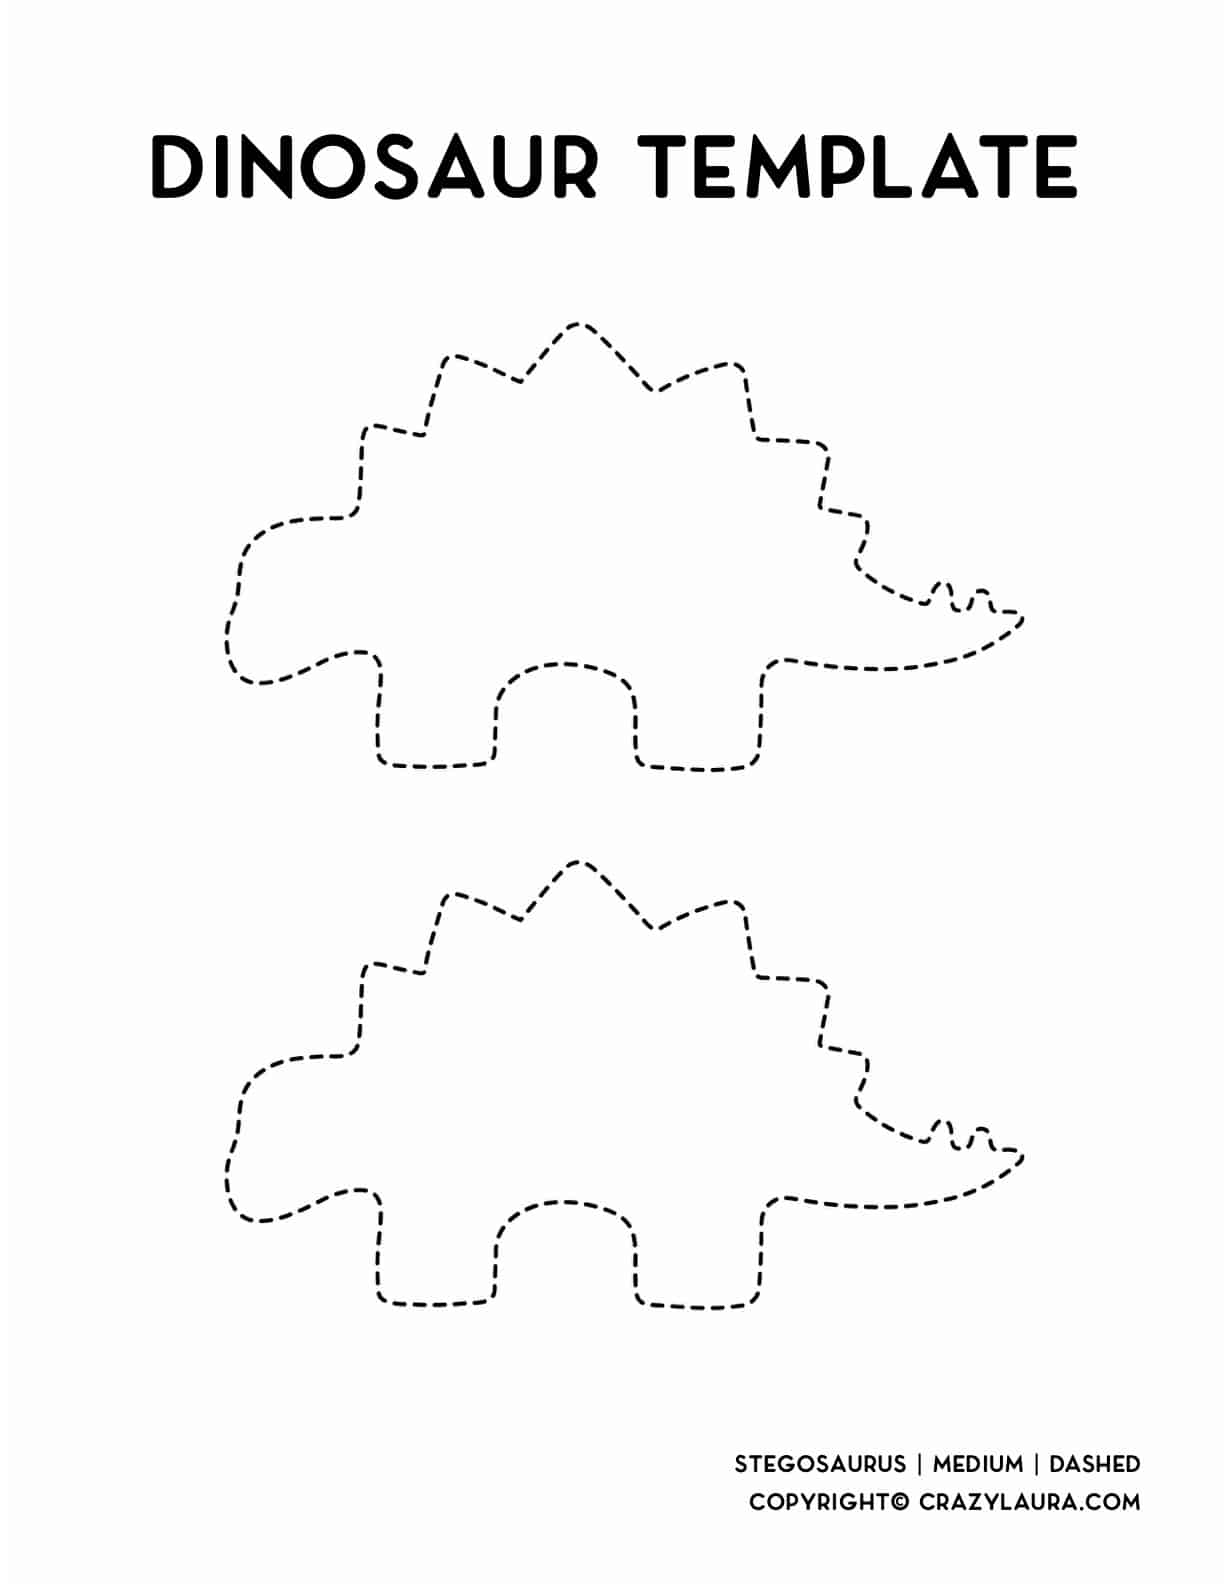 dinosaur template with dashed outline